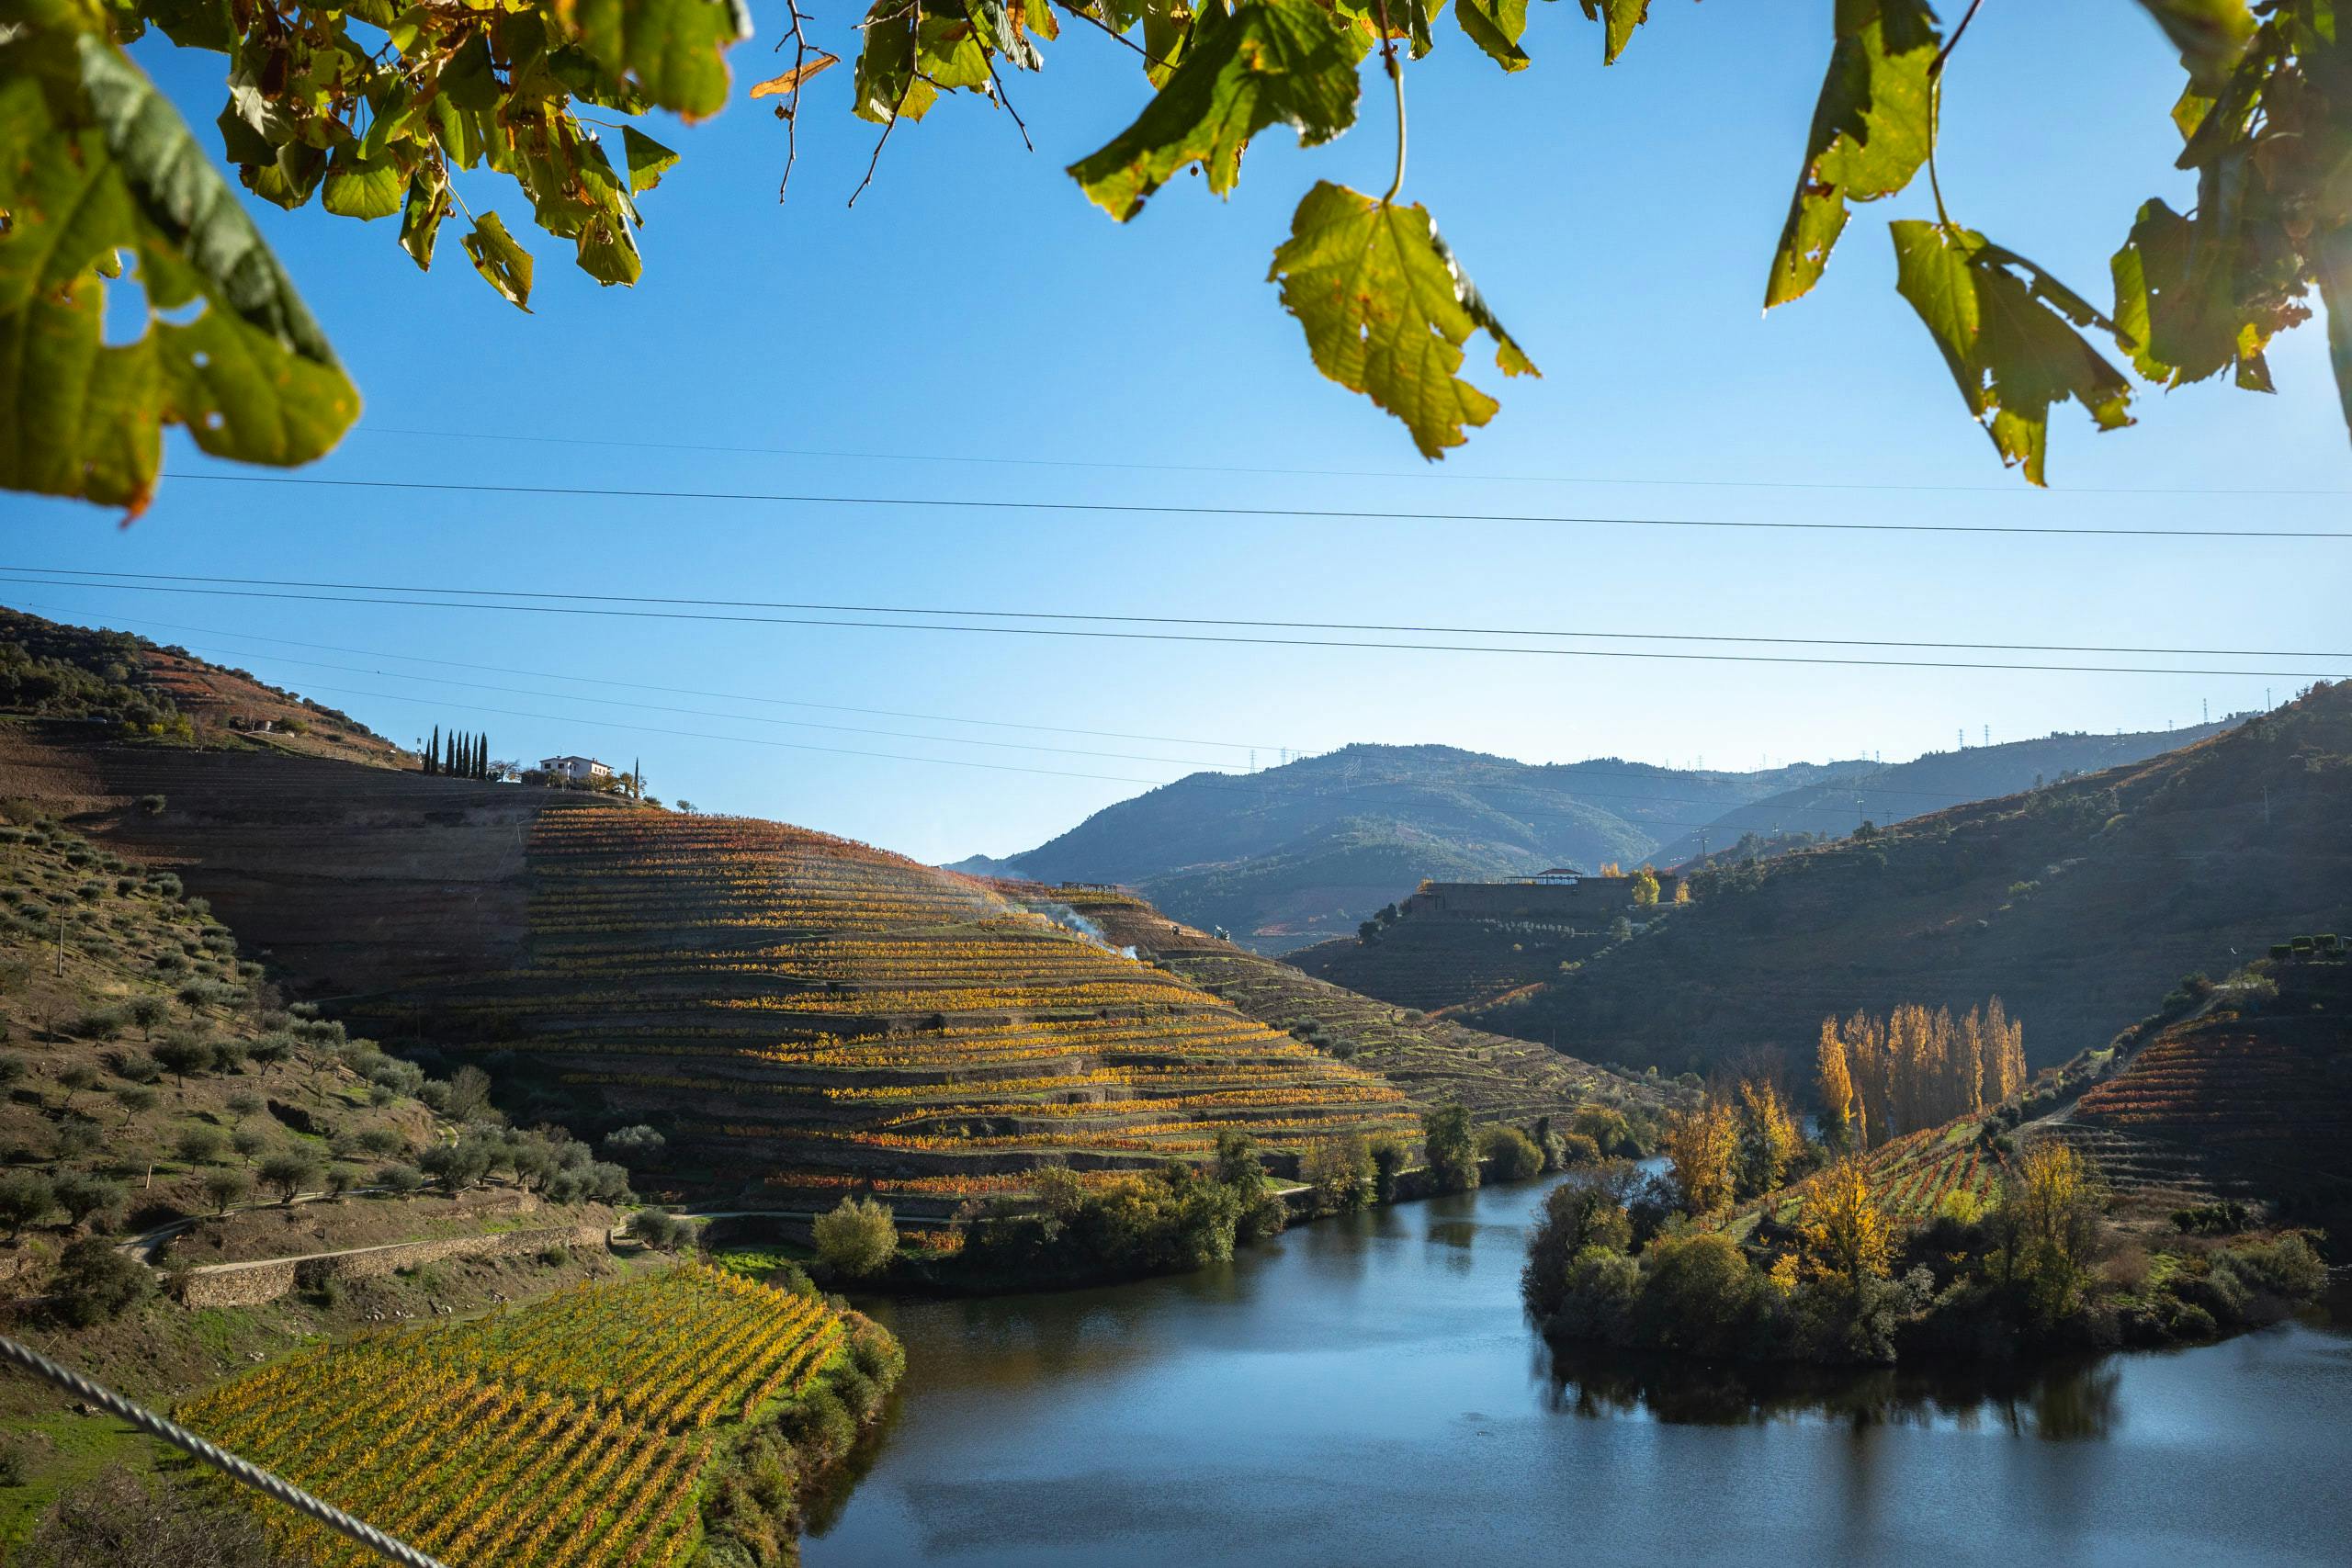 View of vineyards divided by a river in the middle